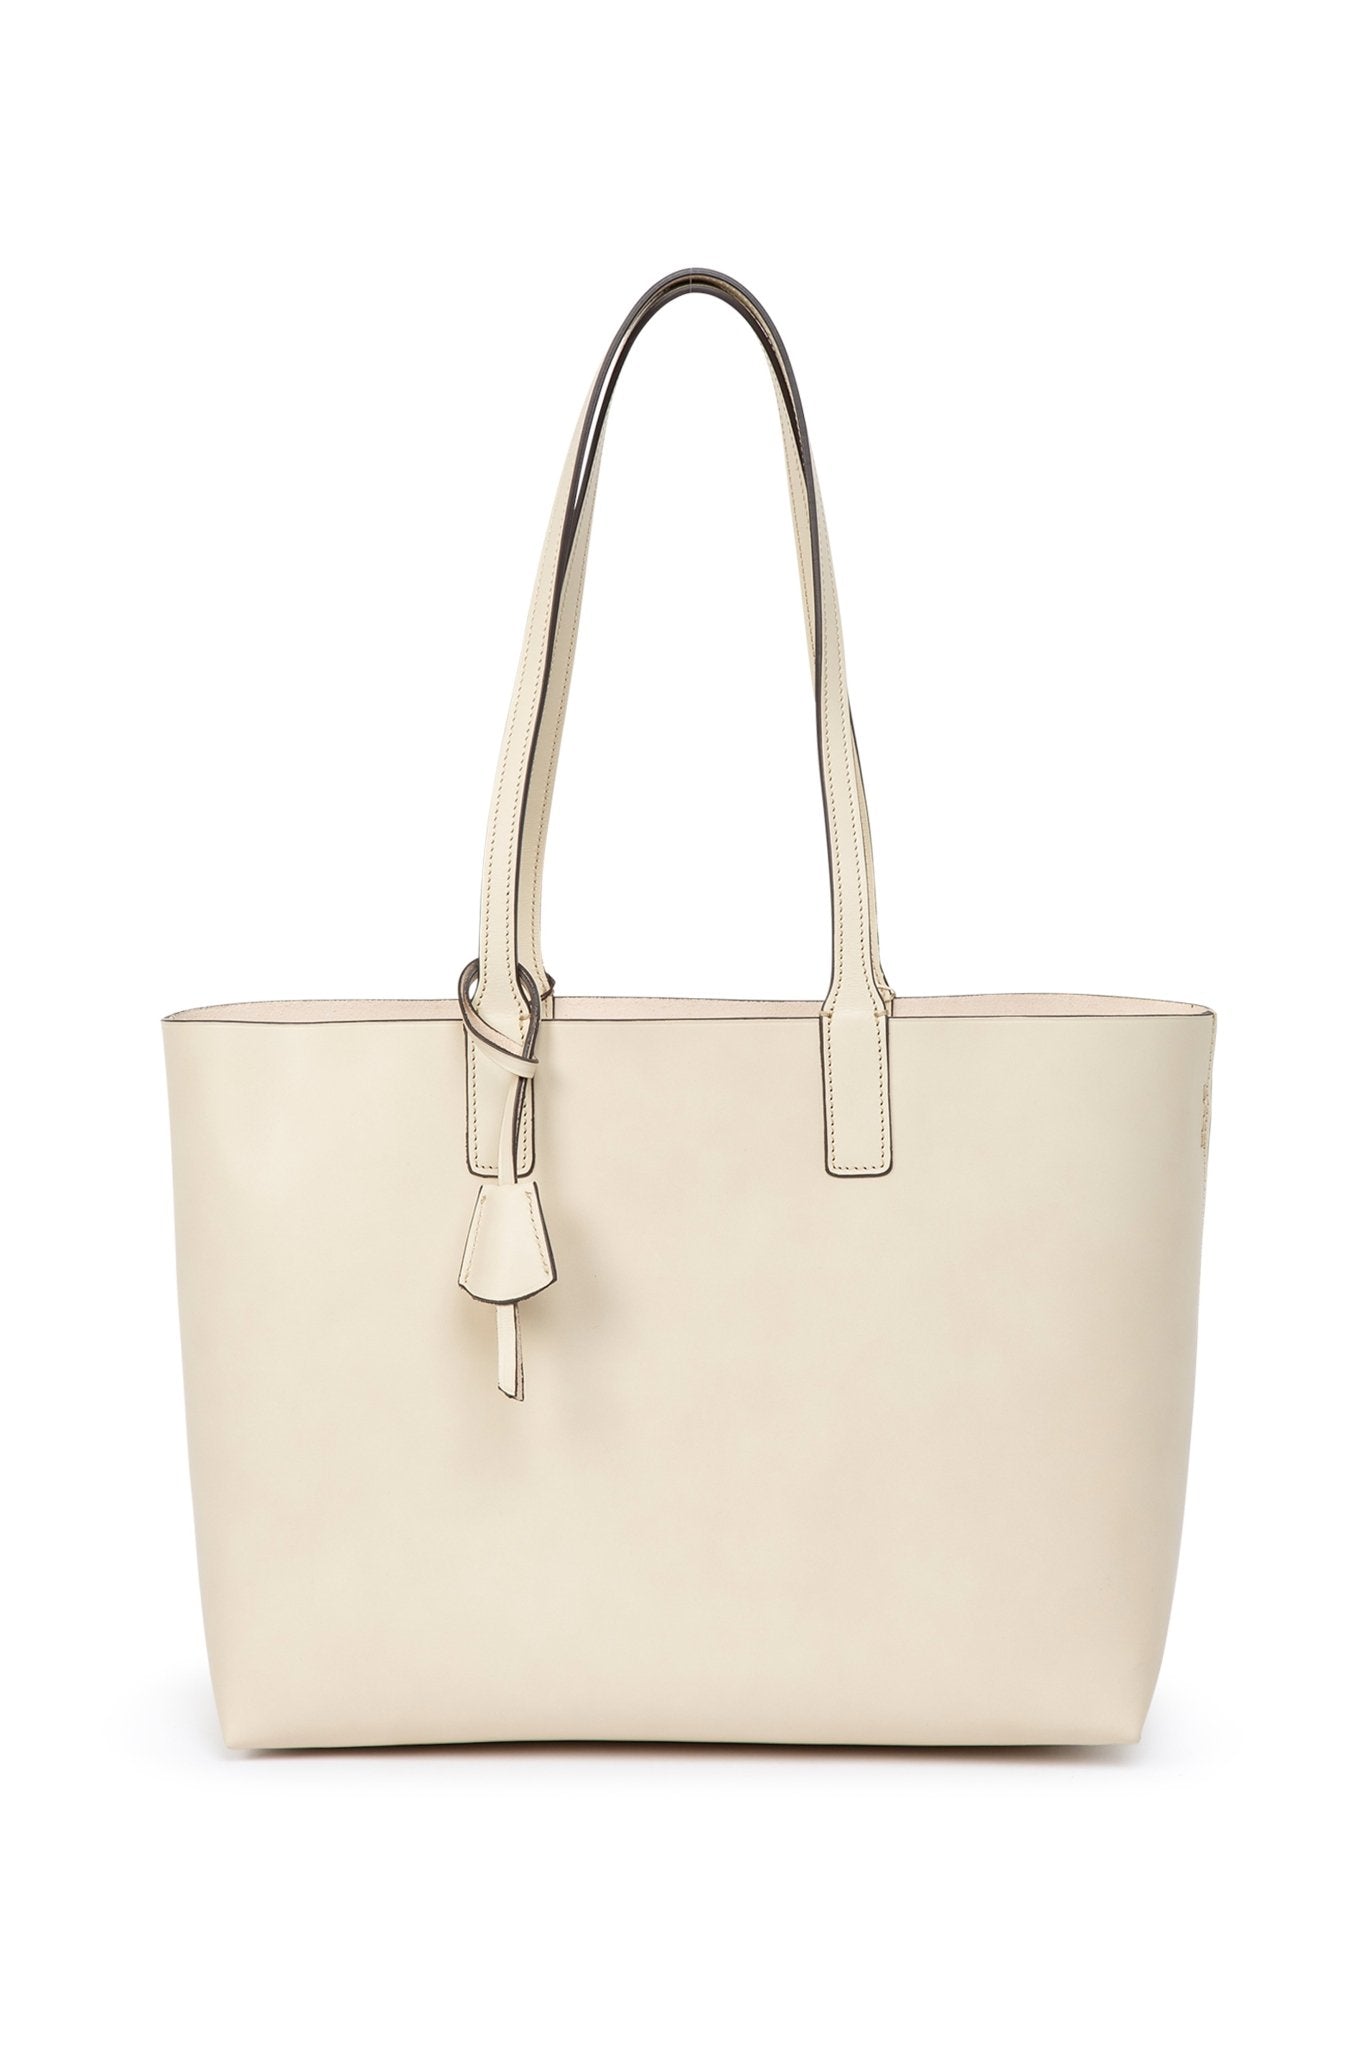 OSSO TOTE IN OFF-WHITE LEATHER - Jarbo